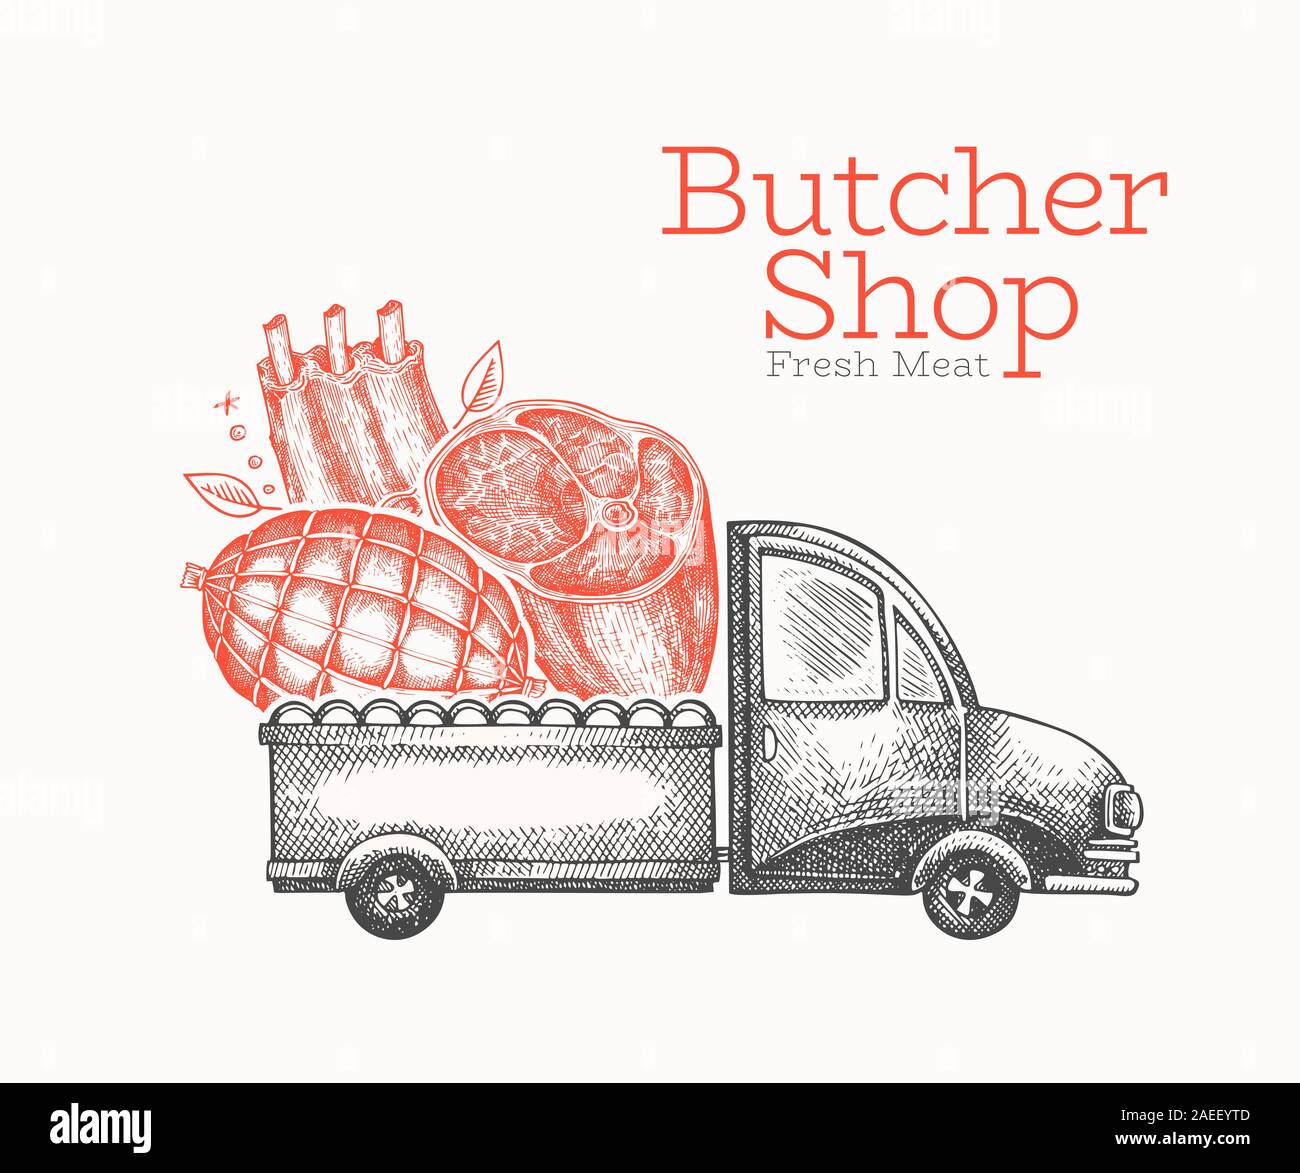 Butcher shop delivery logo template. Hand drawn vector truck with meat illustration. Engraved style vintage food design. Stock Vector